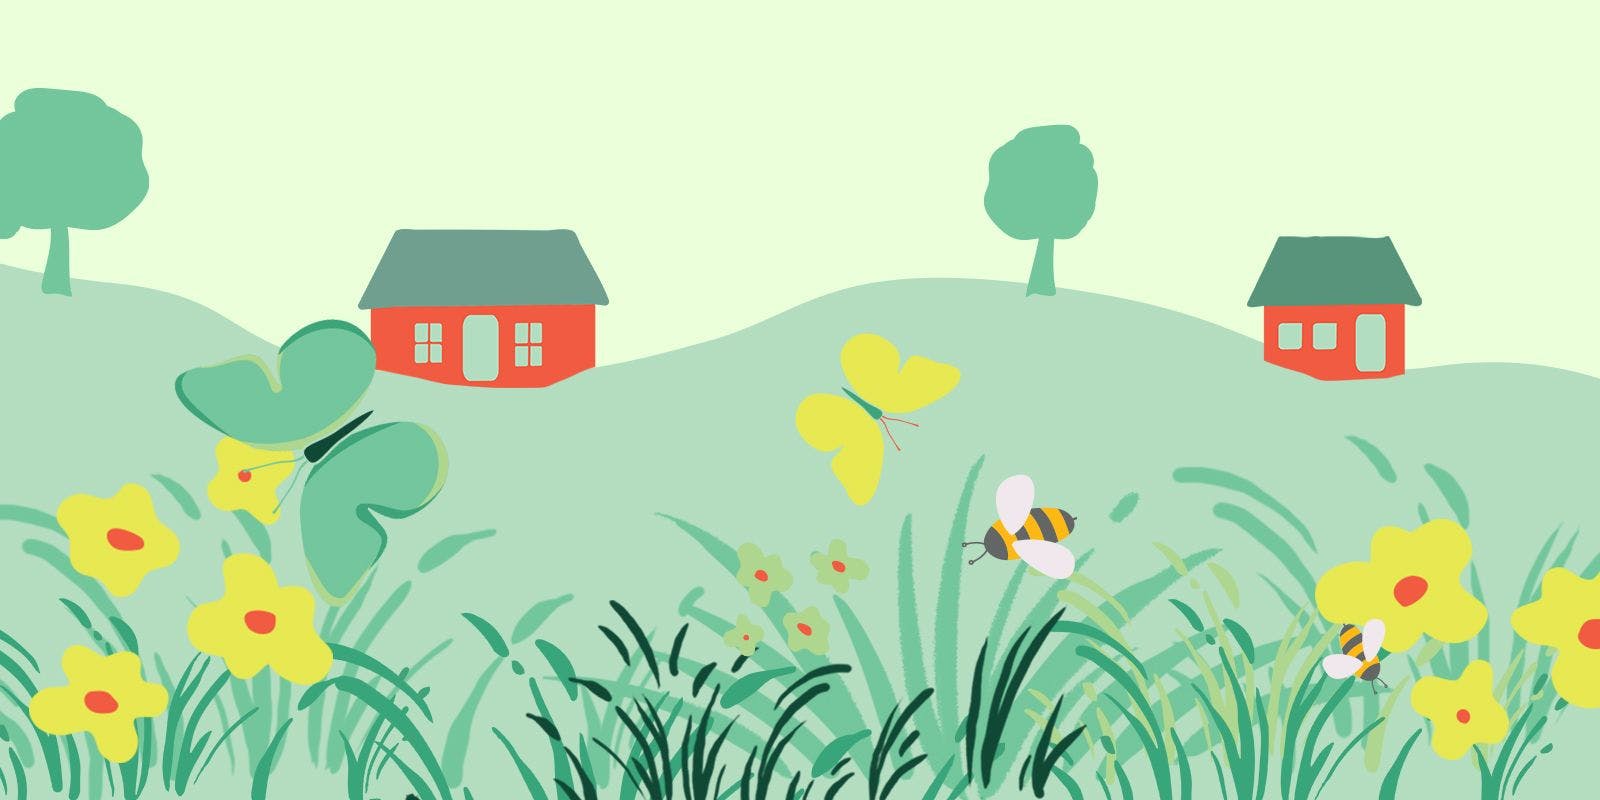 Bees, butterflies, flowers, grass set before a barn, trees and house in a graphic.